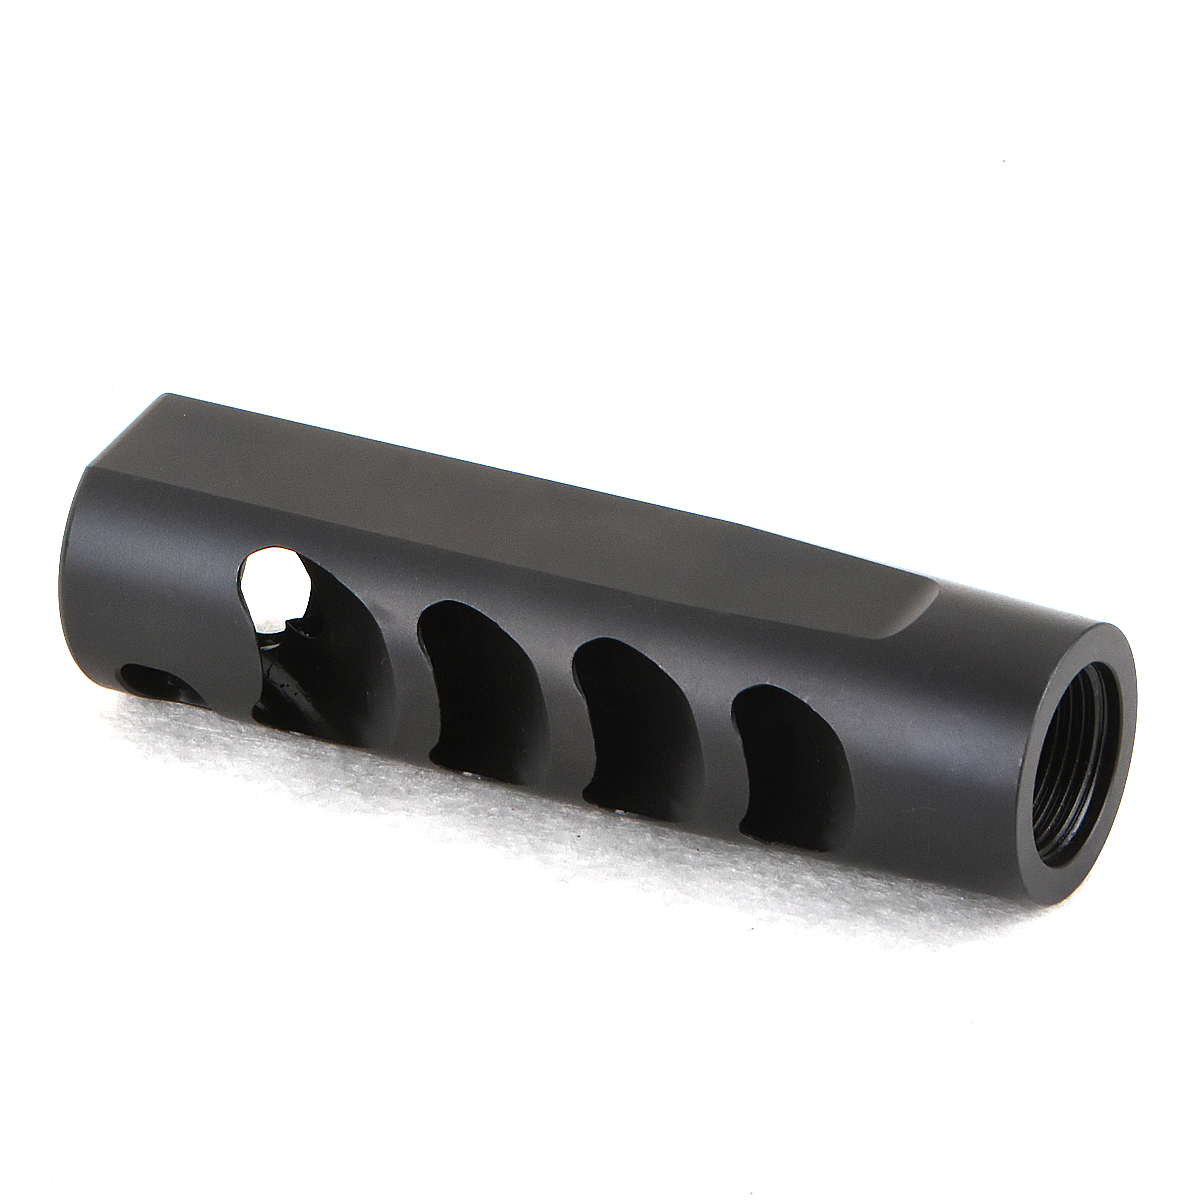 5/8x24 TPI Muzzle Brake Steel Competition for .300 308 7.62 Stainless ...